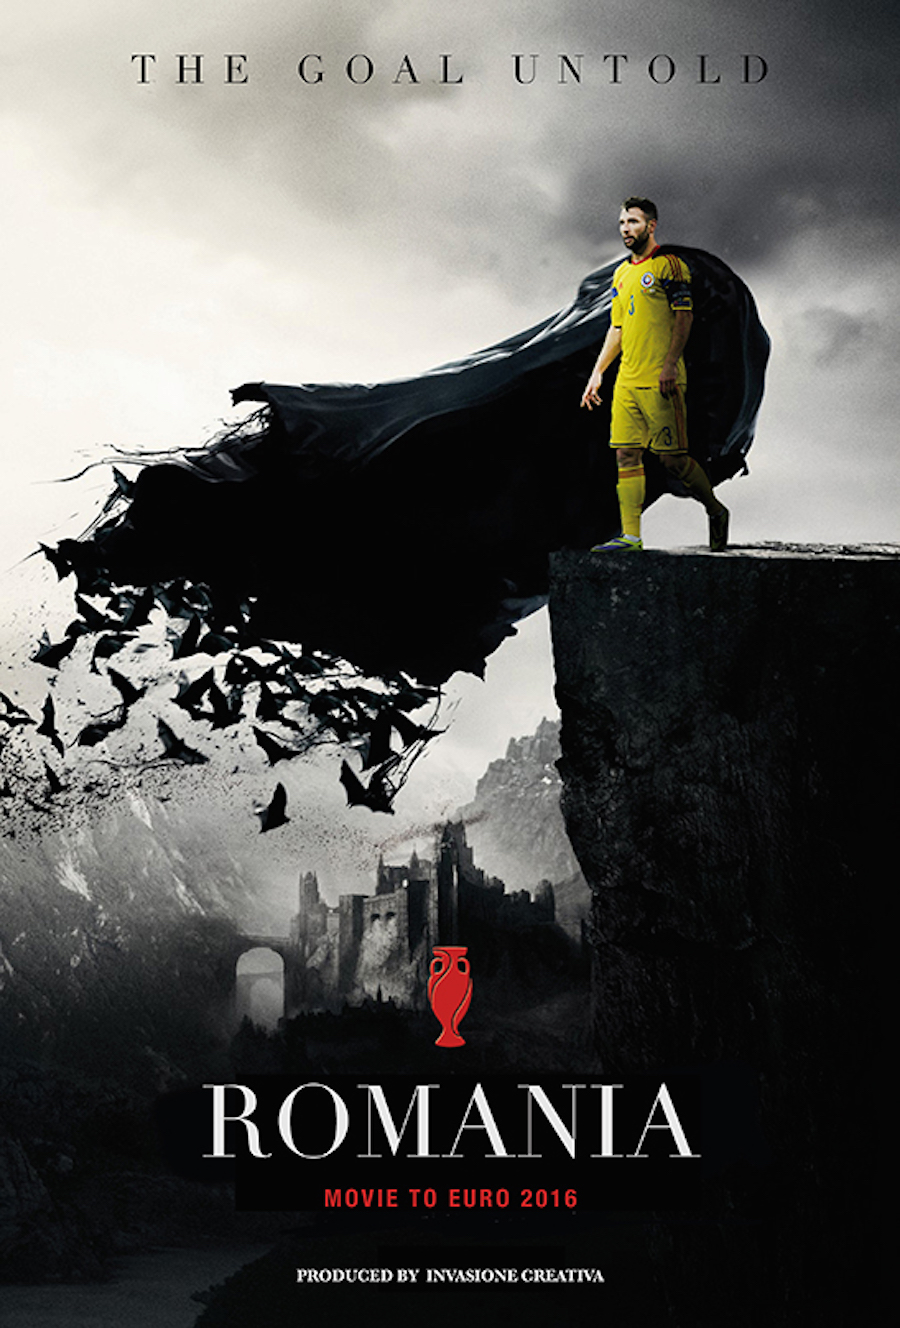 Movie Posters Revisited with Euro 2016 Teams10